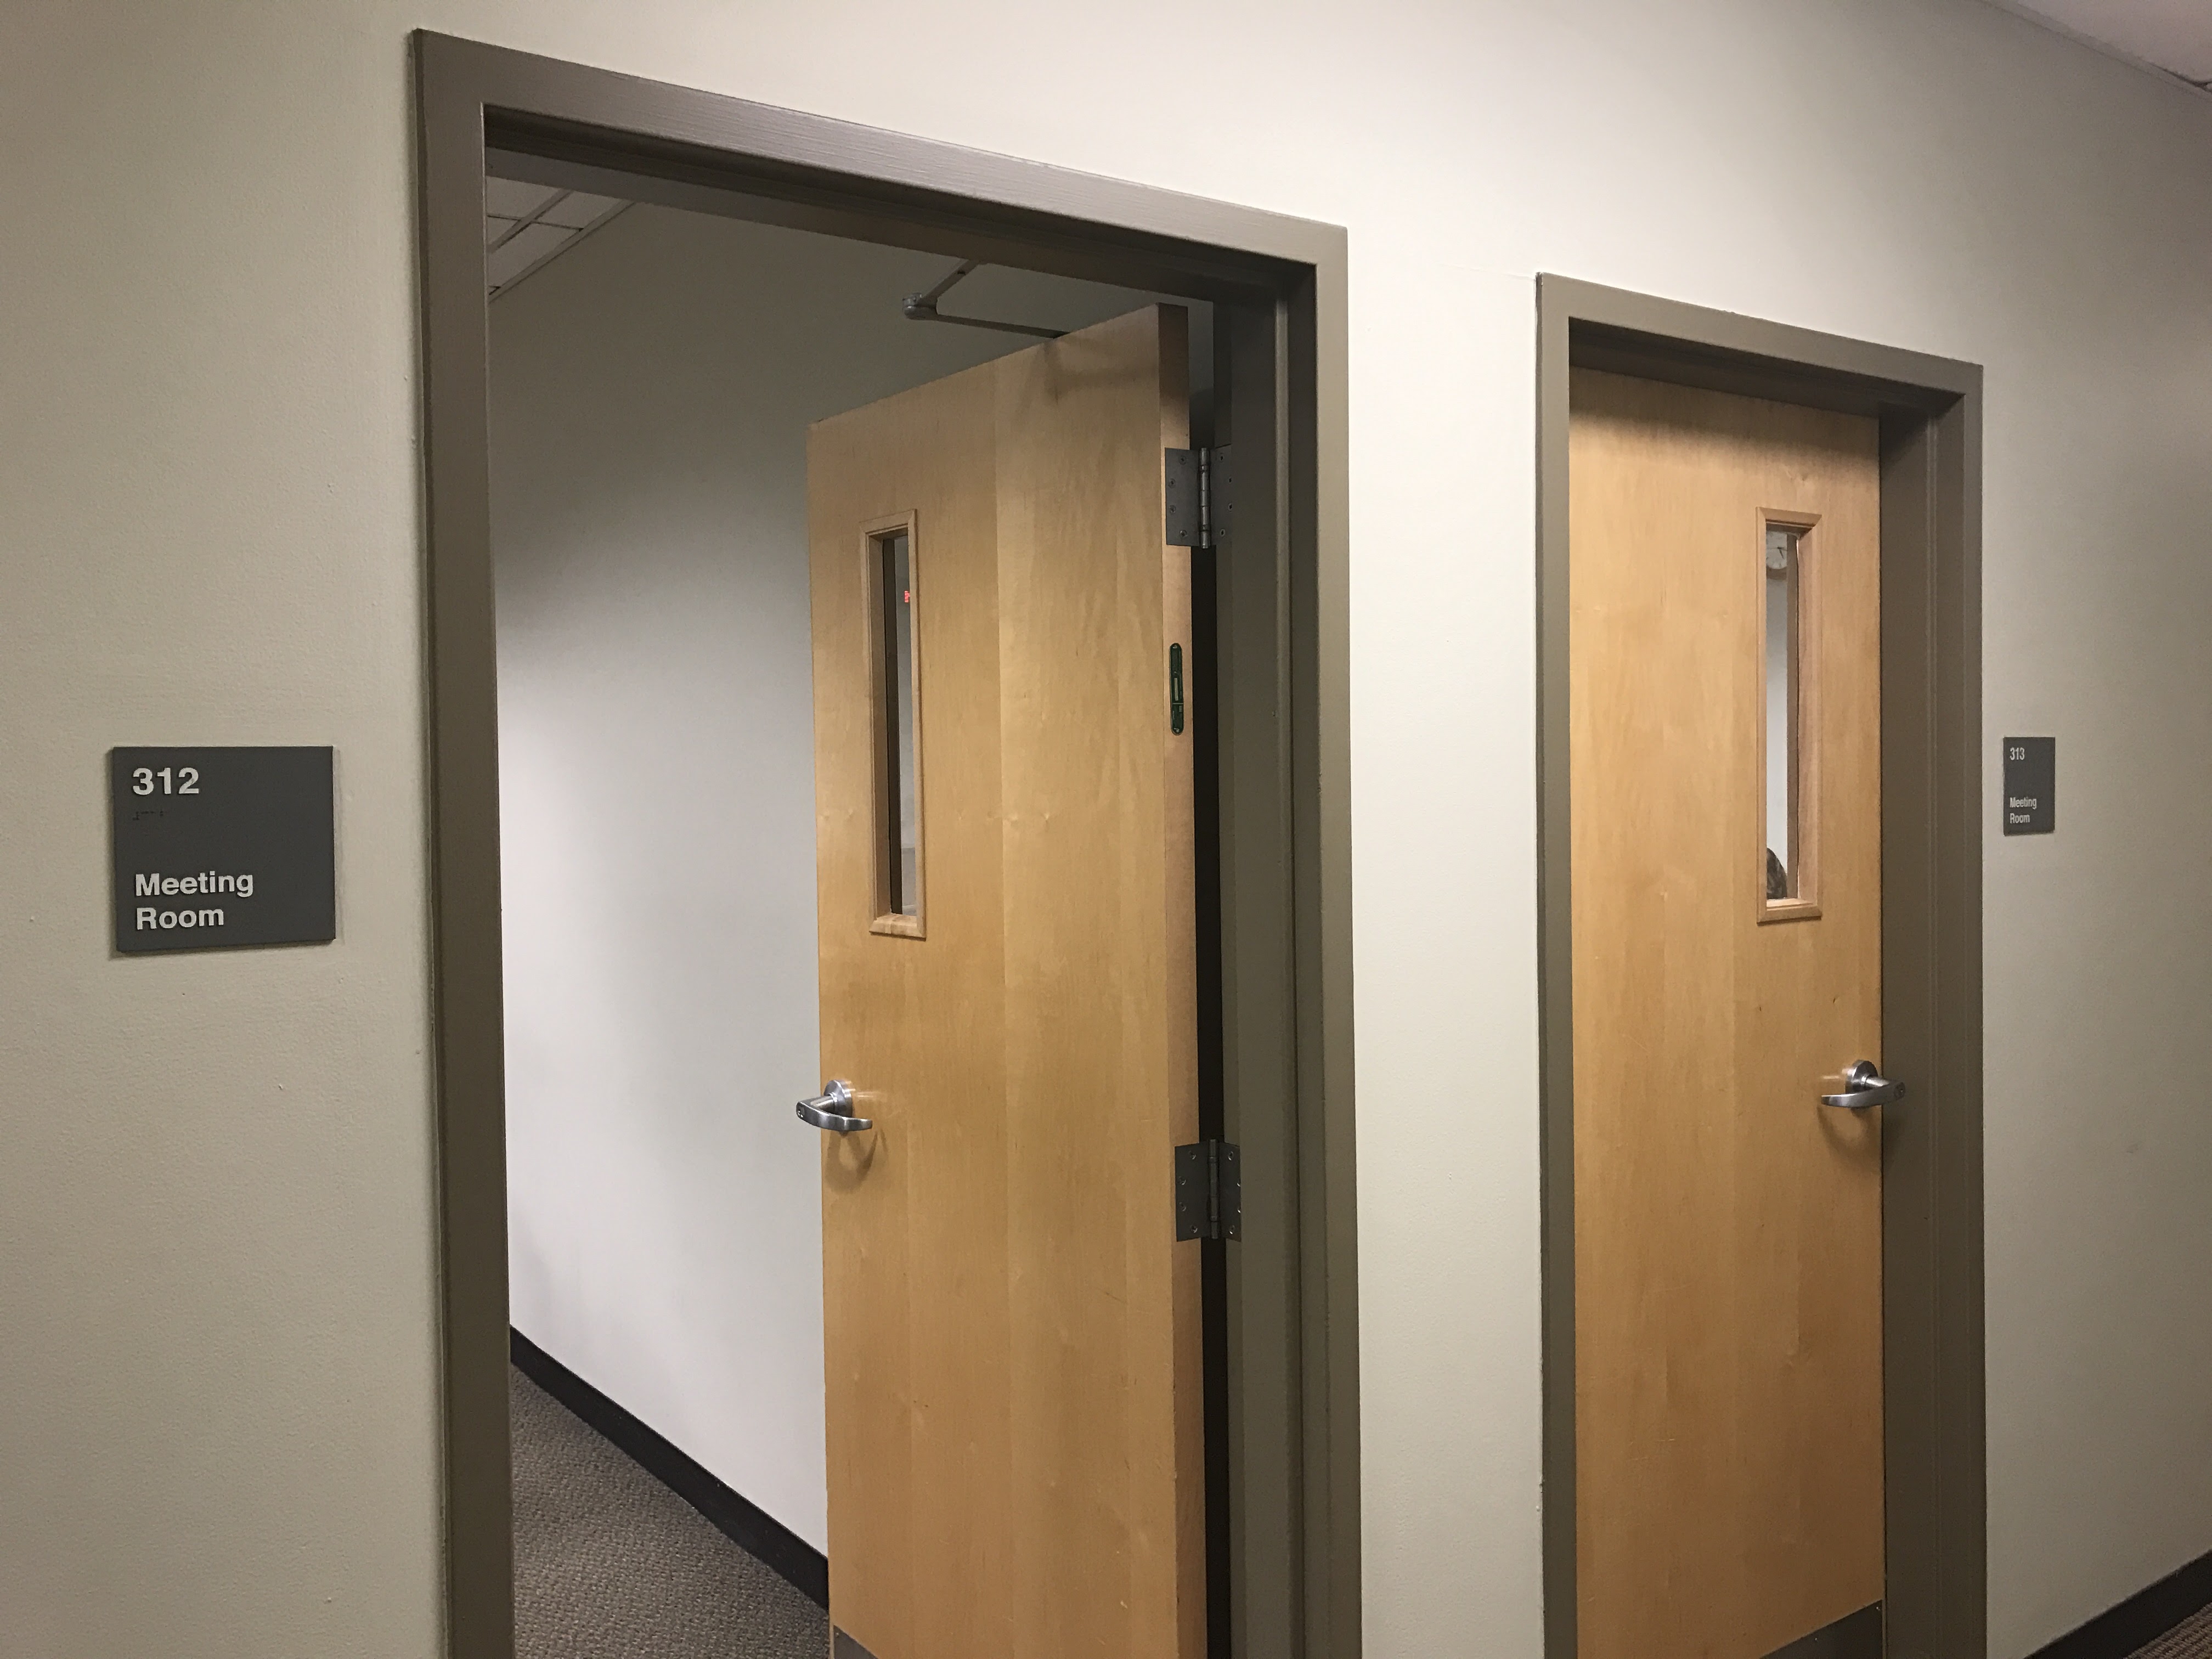 Entrances to rooms 312 and 313.